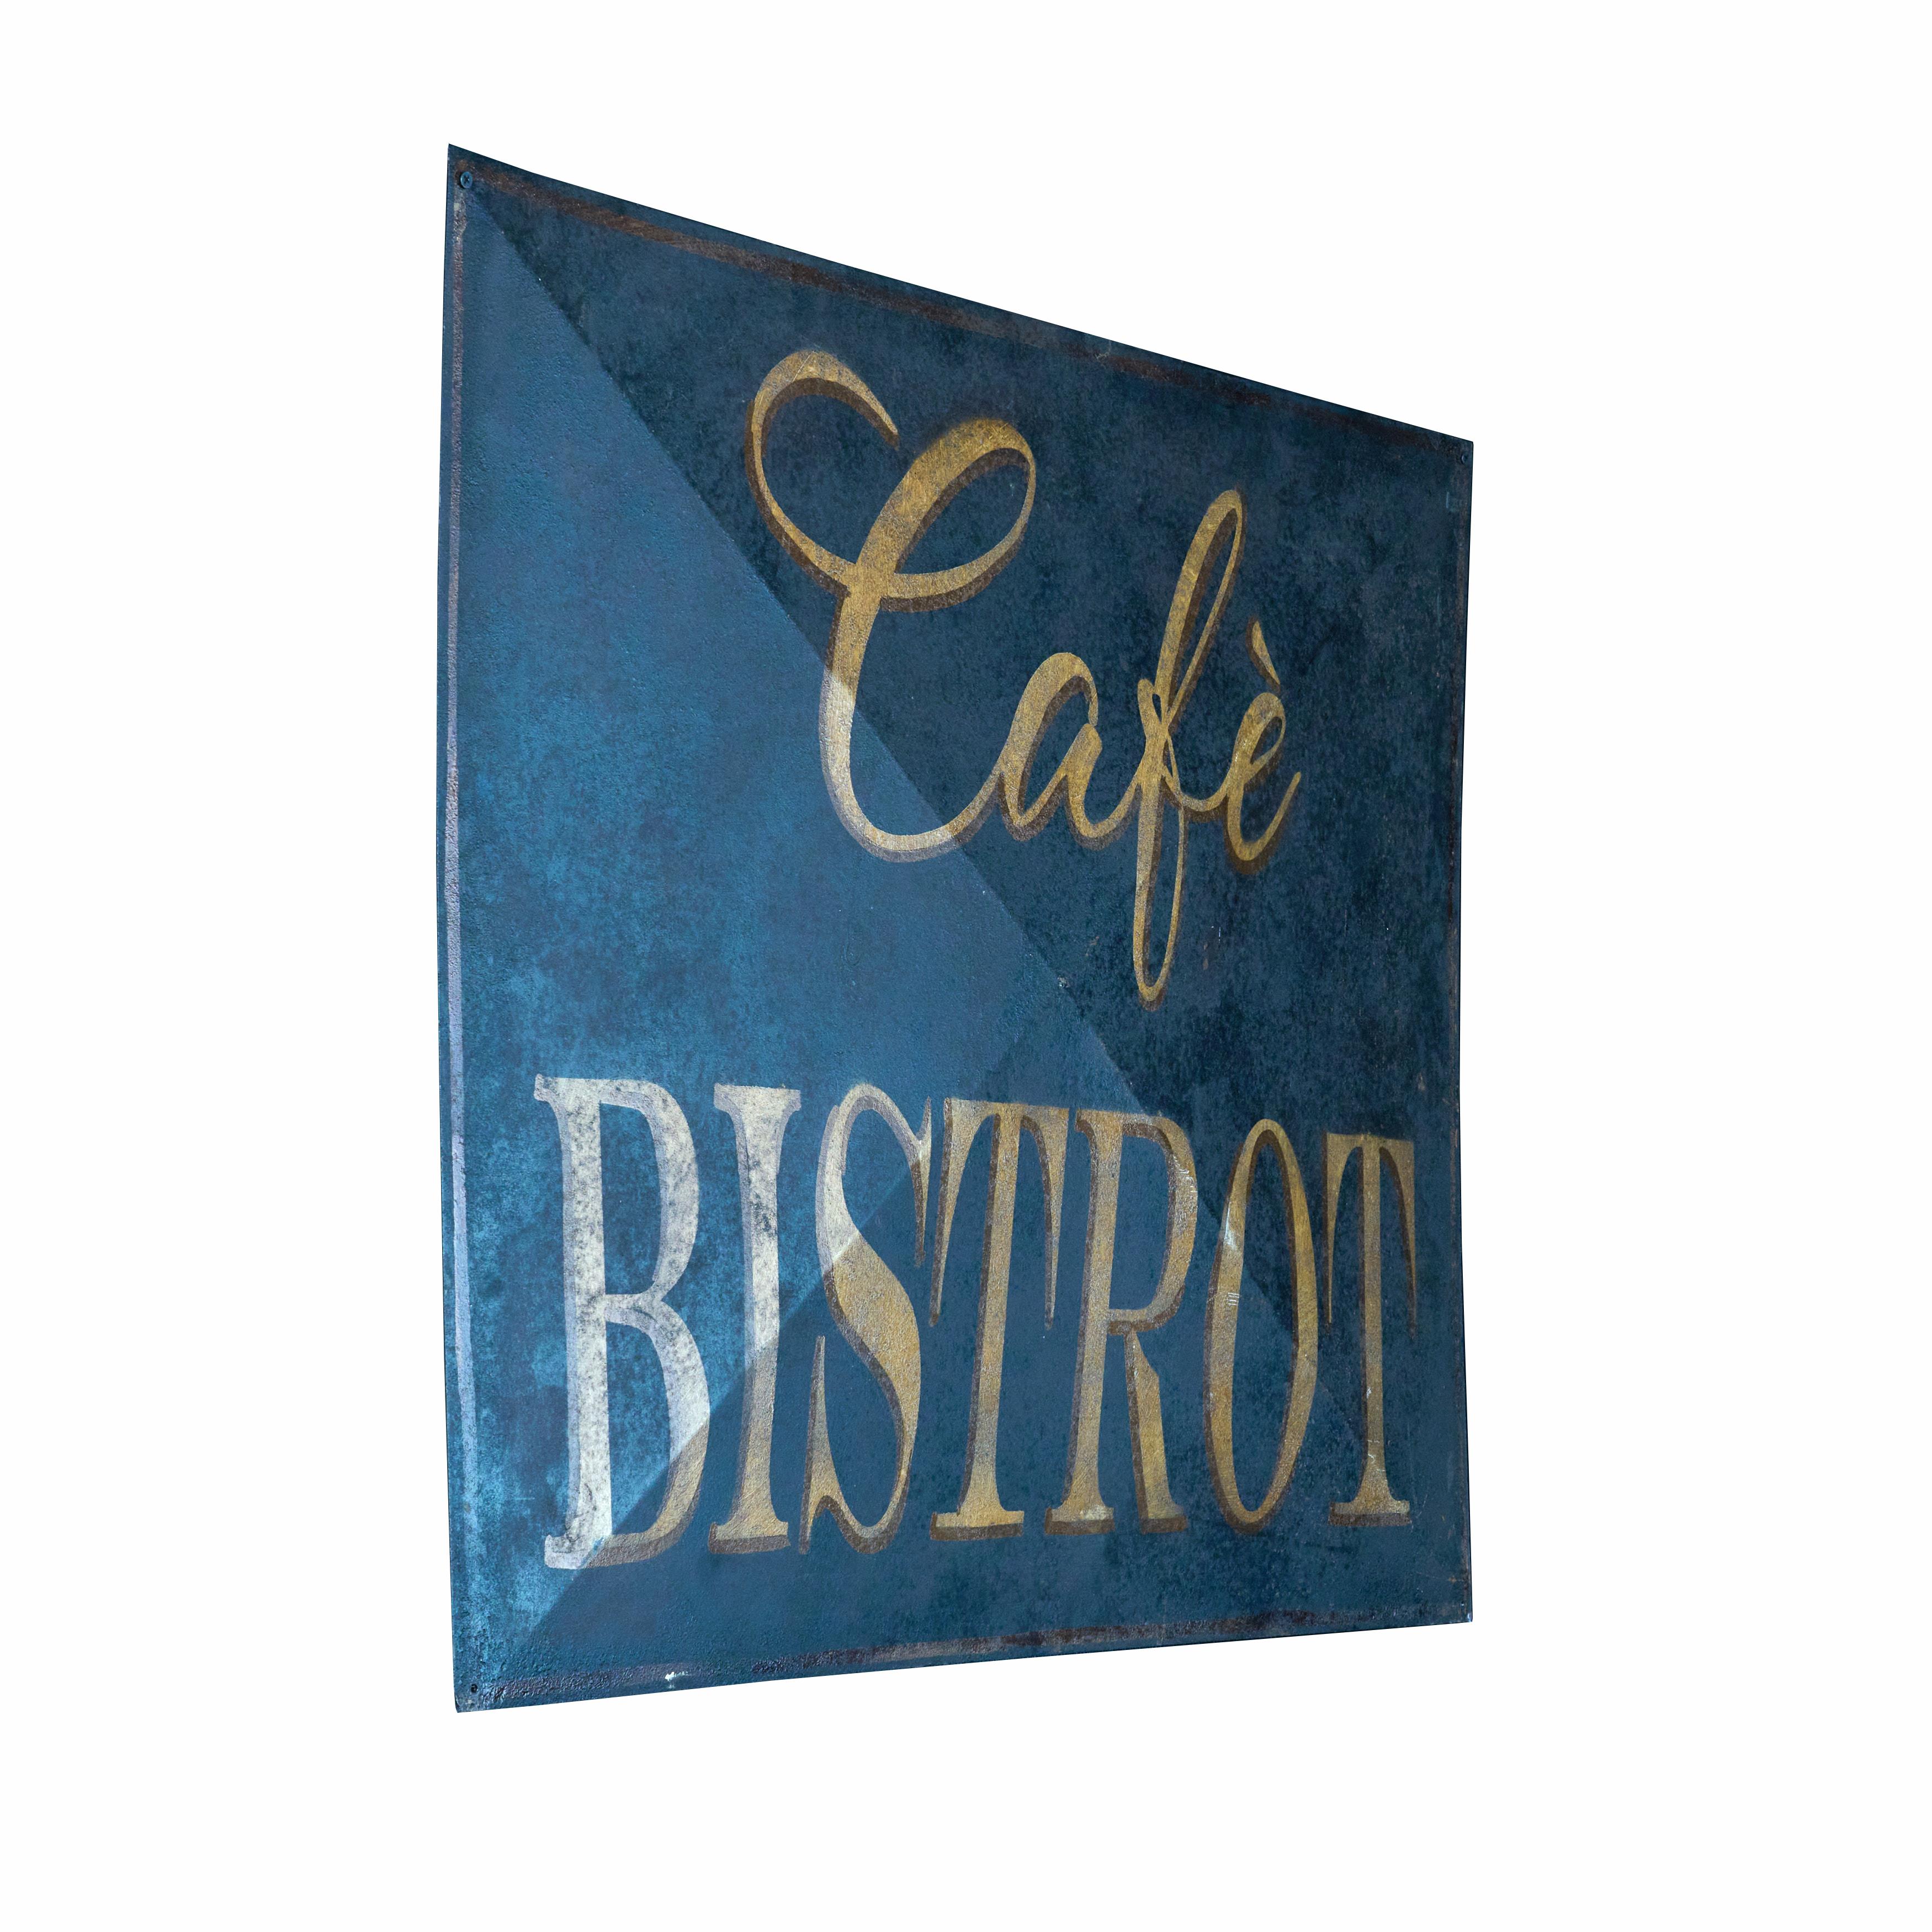 Original Cafe Bistro sign. Fantastic looking with incredible paint and patina. Great condition. 

